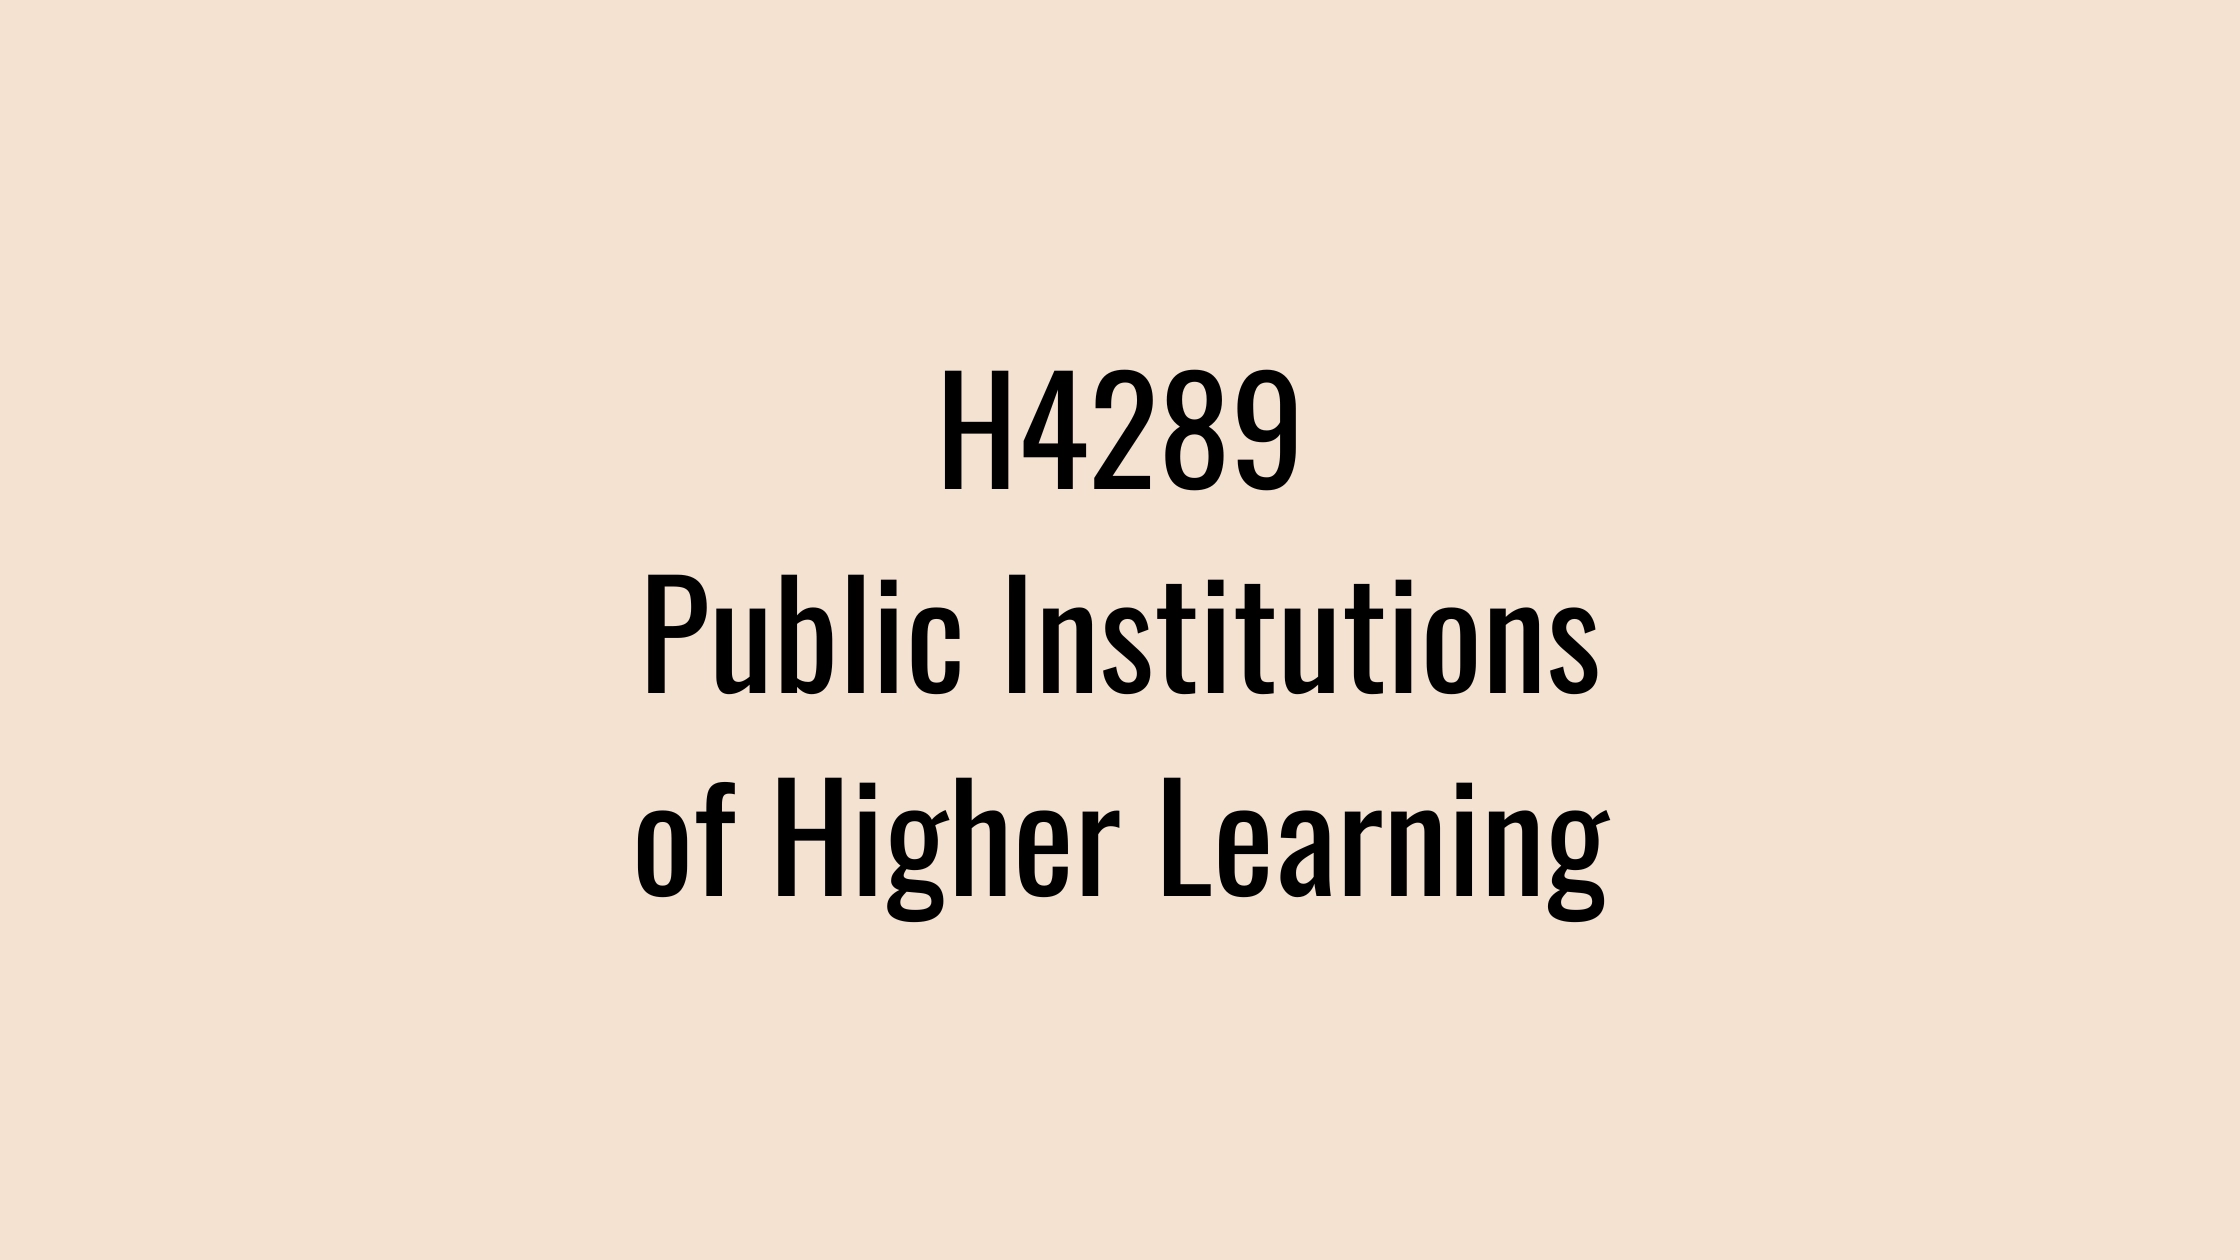 H4289: Public Institutions of Higher Learning